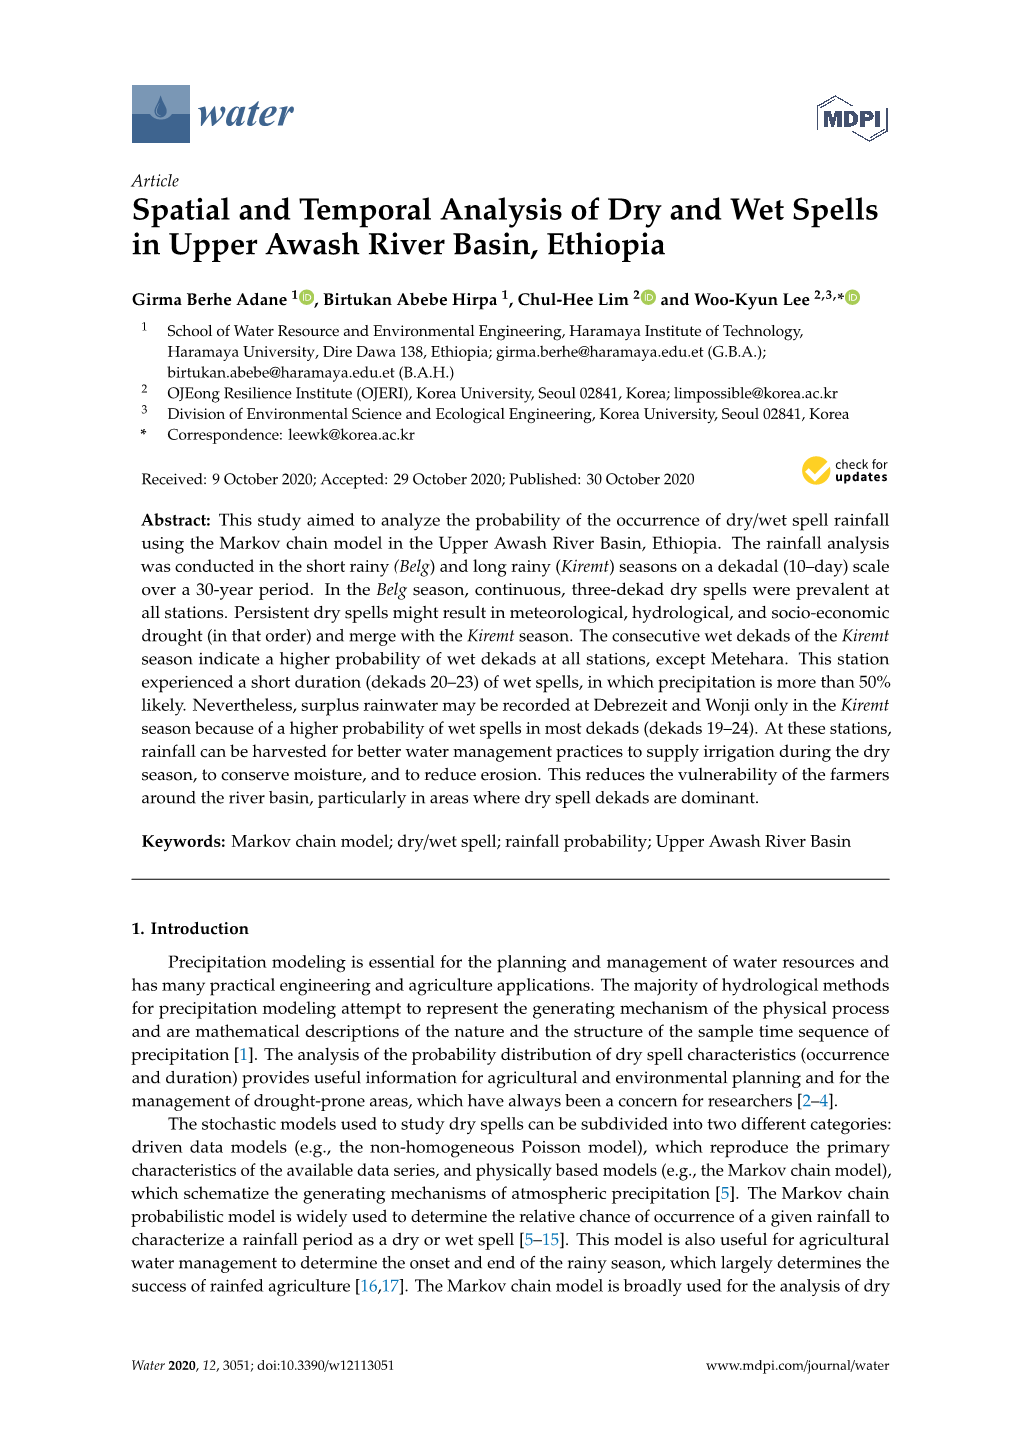 Spatial and Temporal Analysis of Dry and Wet Spells in Upper Awash River Basin, Ethiopia